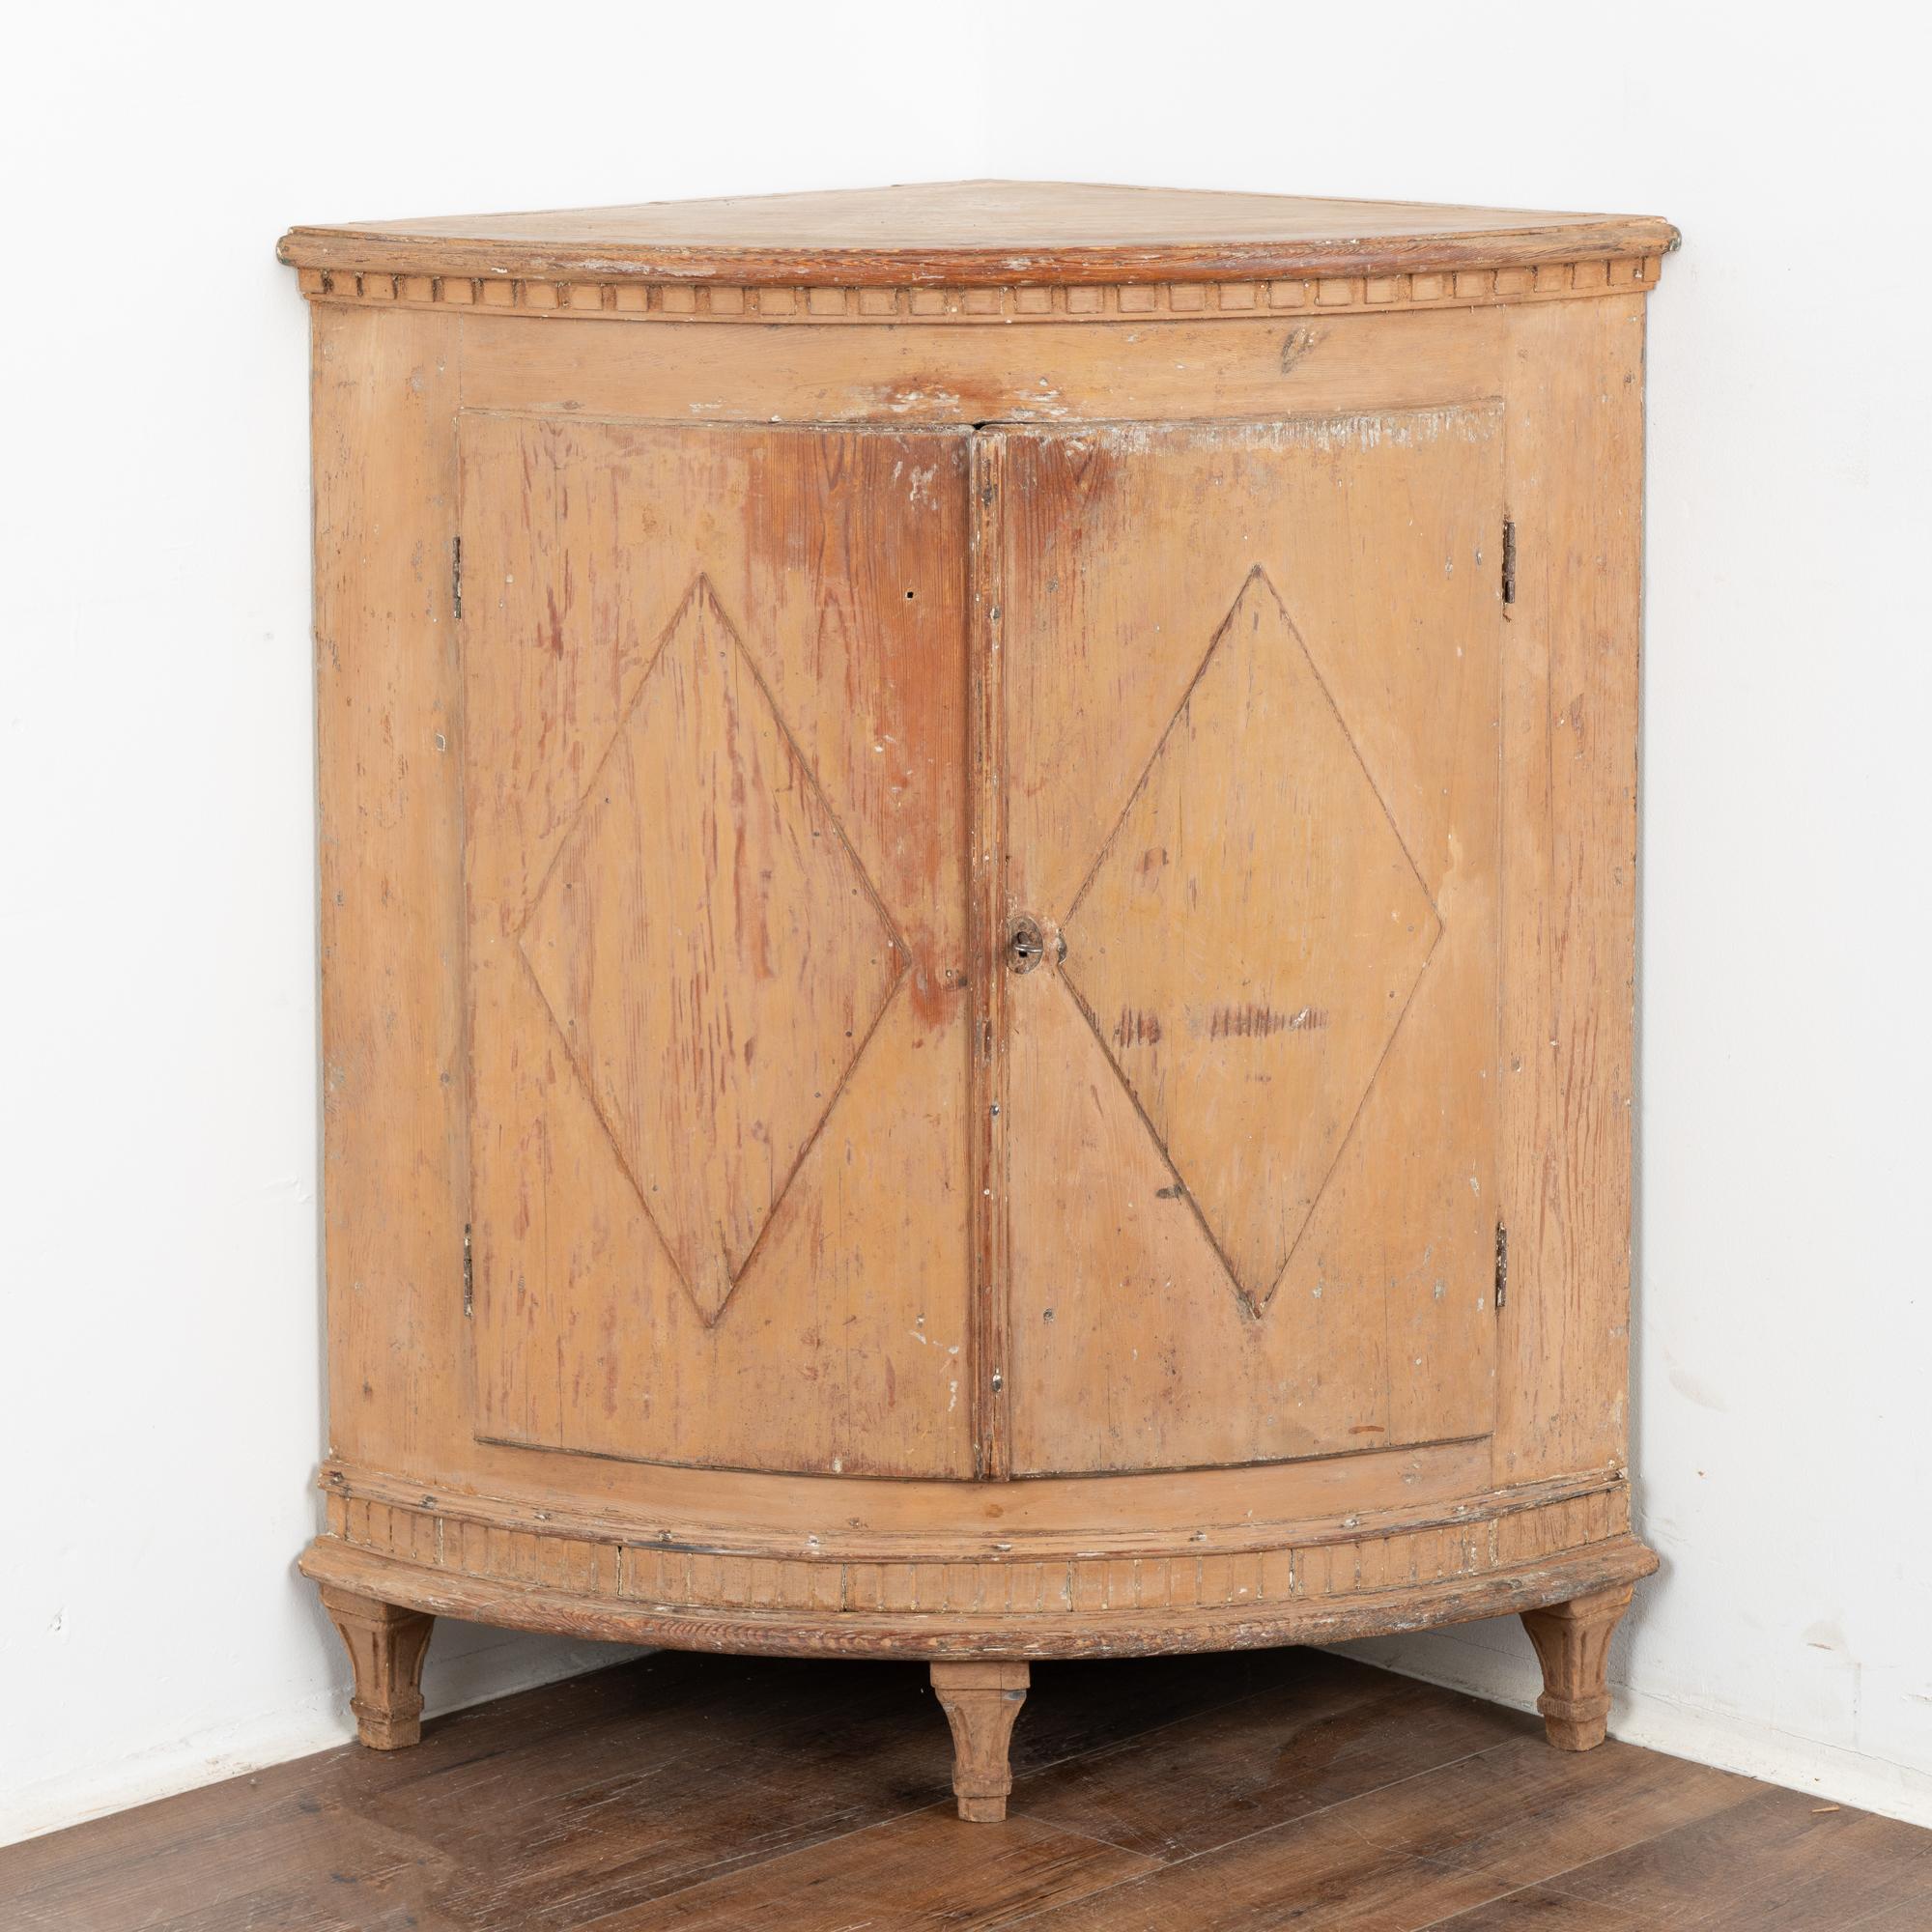 Low corner cabinet from Sweden with original buff colored paint, distressed throughout revealing the natural pine below.
Traditional diamond motif on panel doors, bow front exterior and dentil molding. Rests on tapered fluted feet.
Restored, this